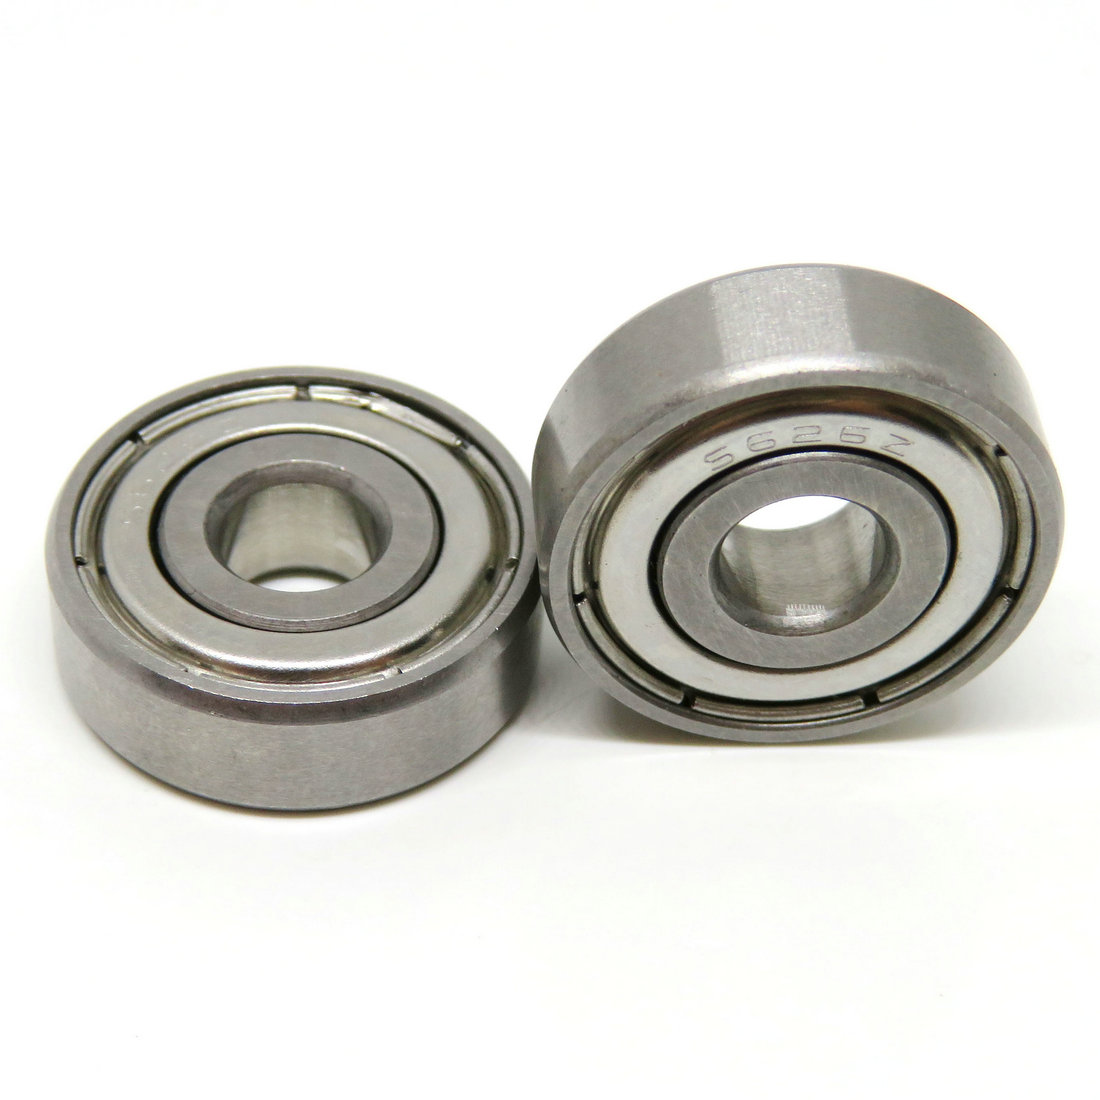 S603 ZZ ABEC-5 3x9x3mm Stainless steel Deep Groove Ball bearing double shielded S603ZZ